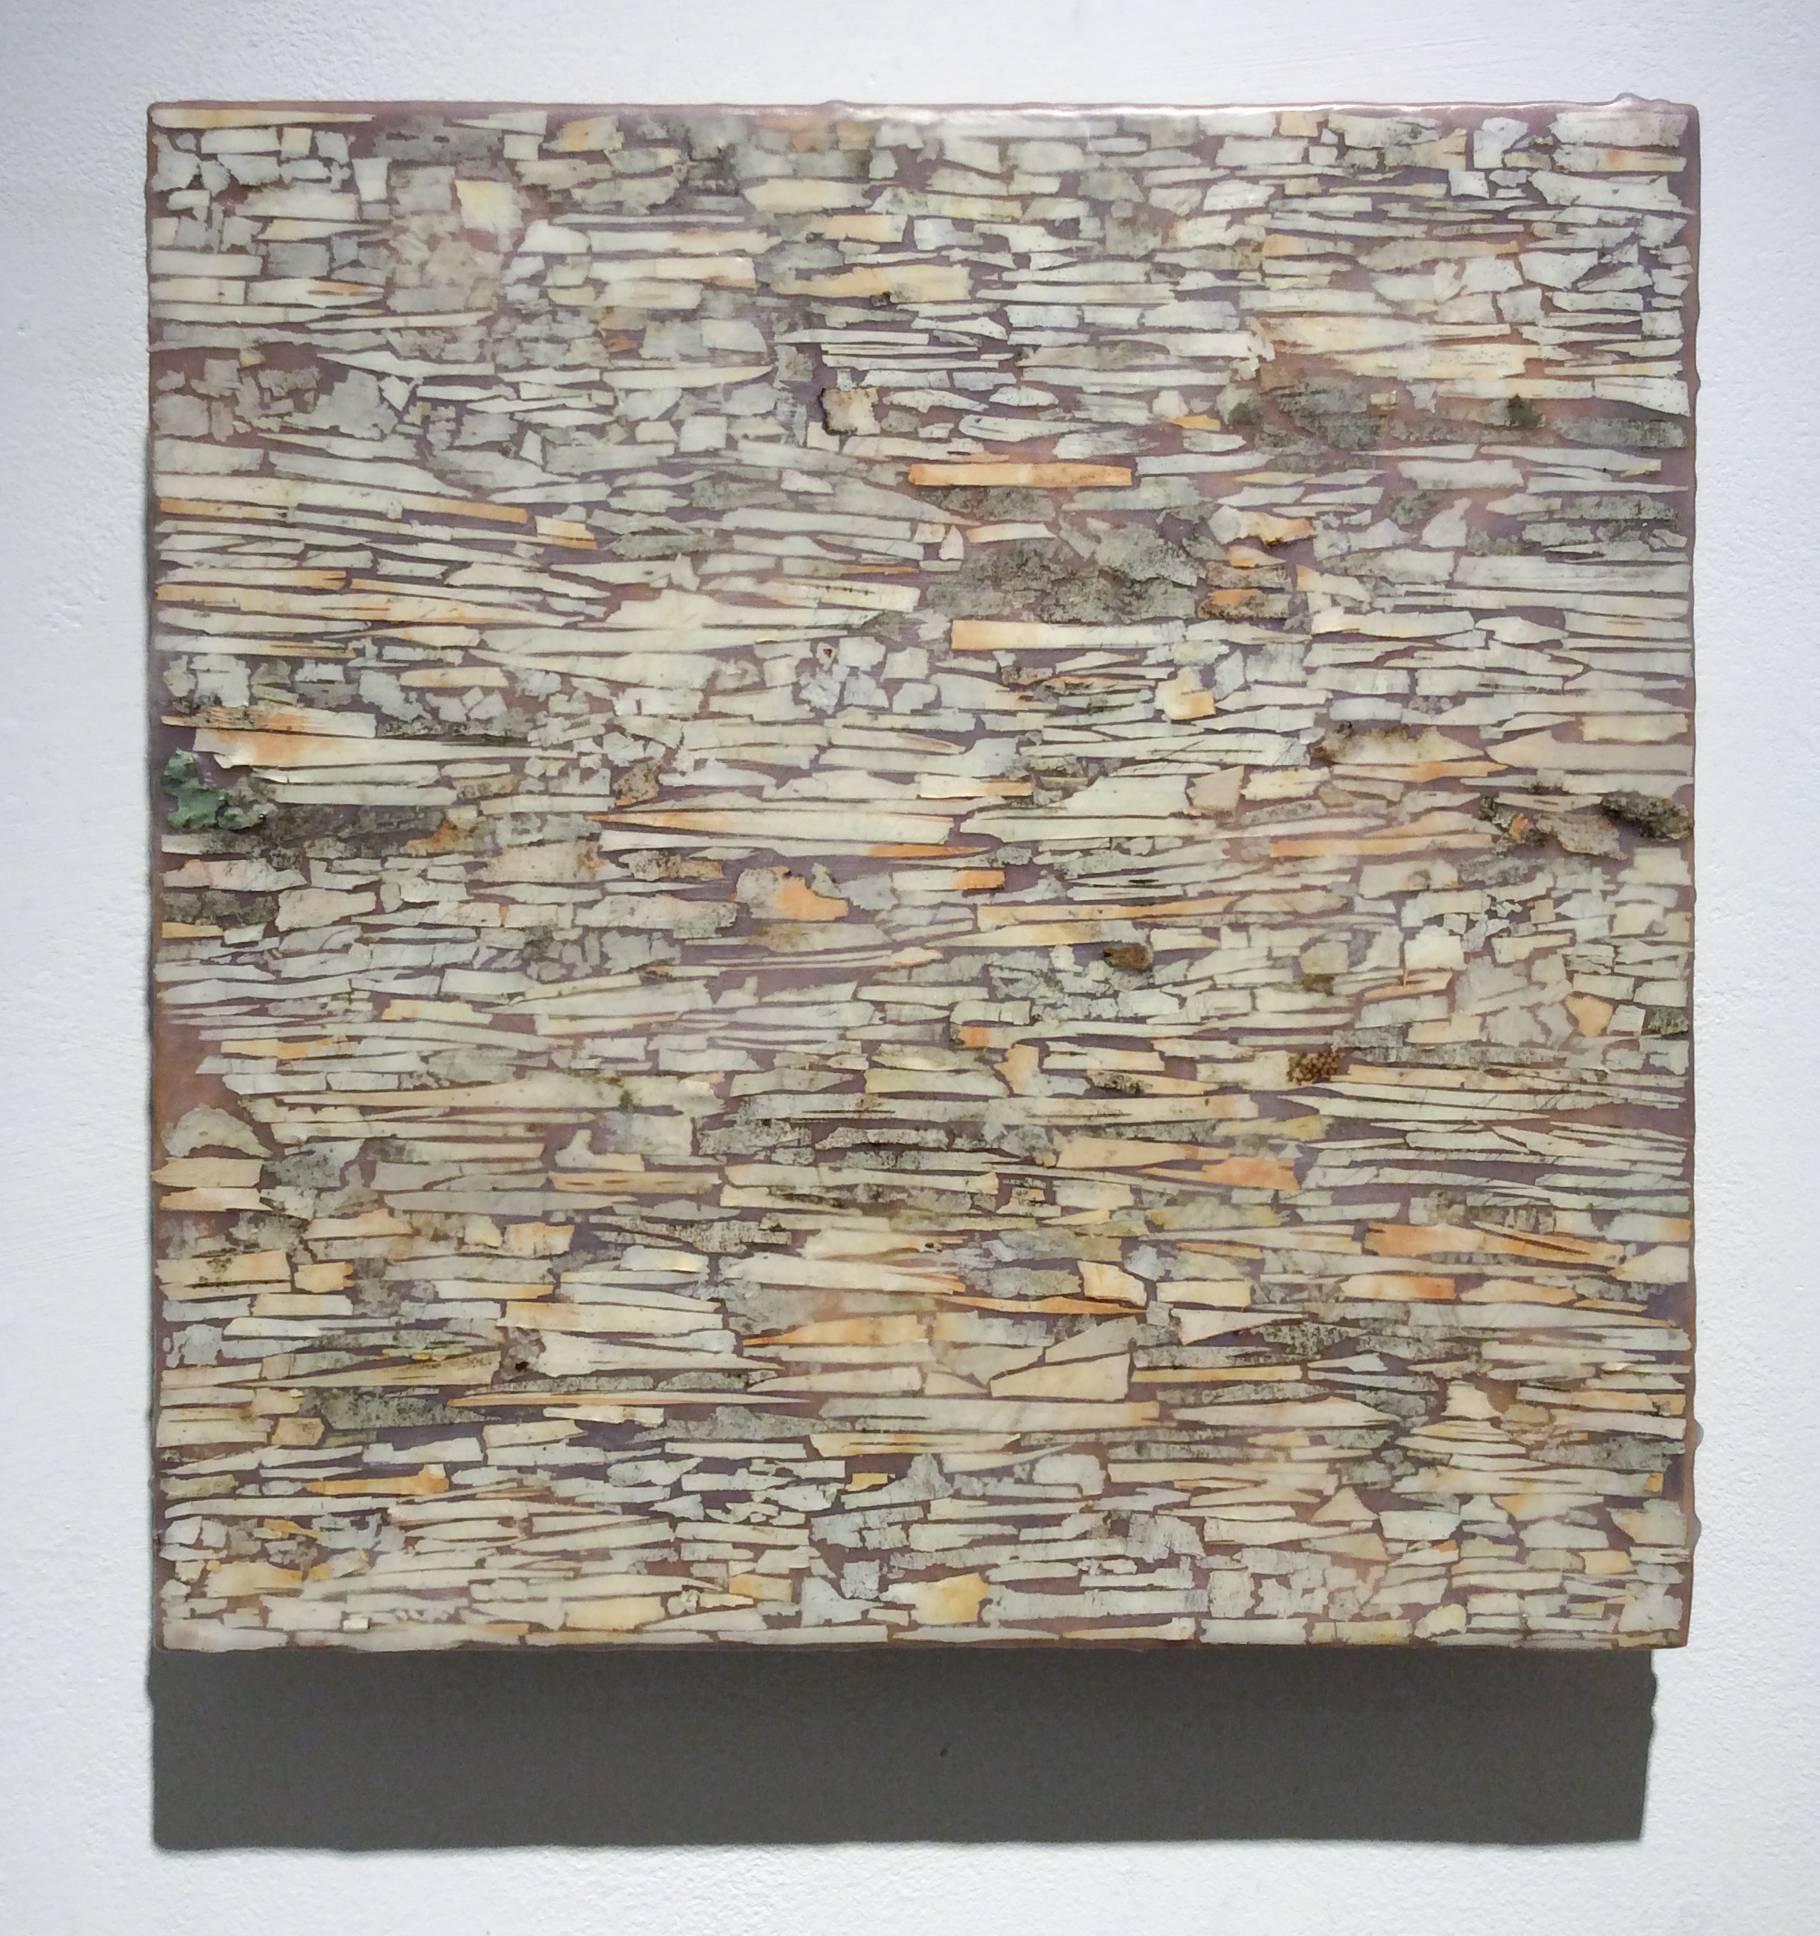 Barking Up the Wrong Tree 2 (Abstract Encaustic Painting in Neutral Palette) - Brown Abstract Painting by Allyson Levy